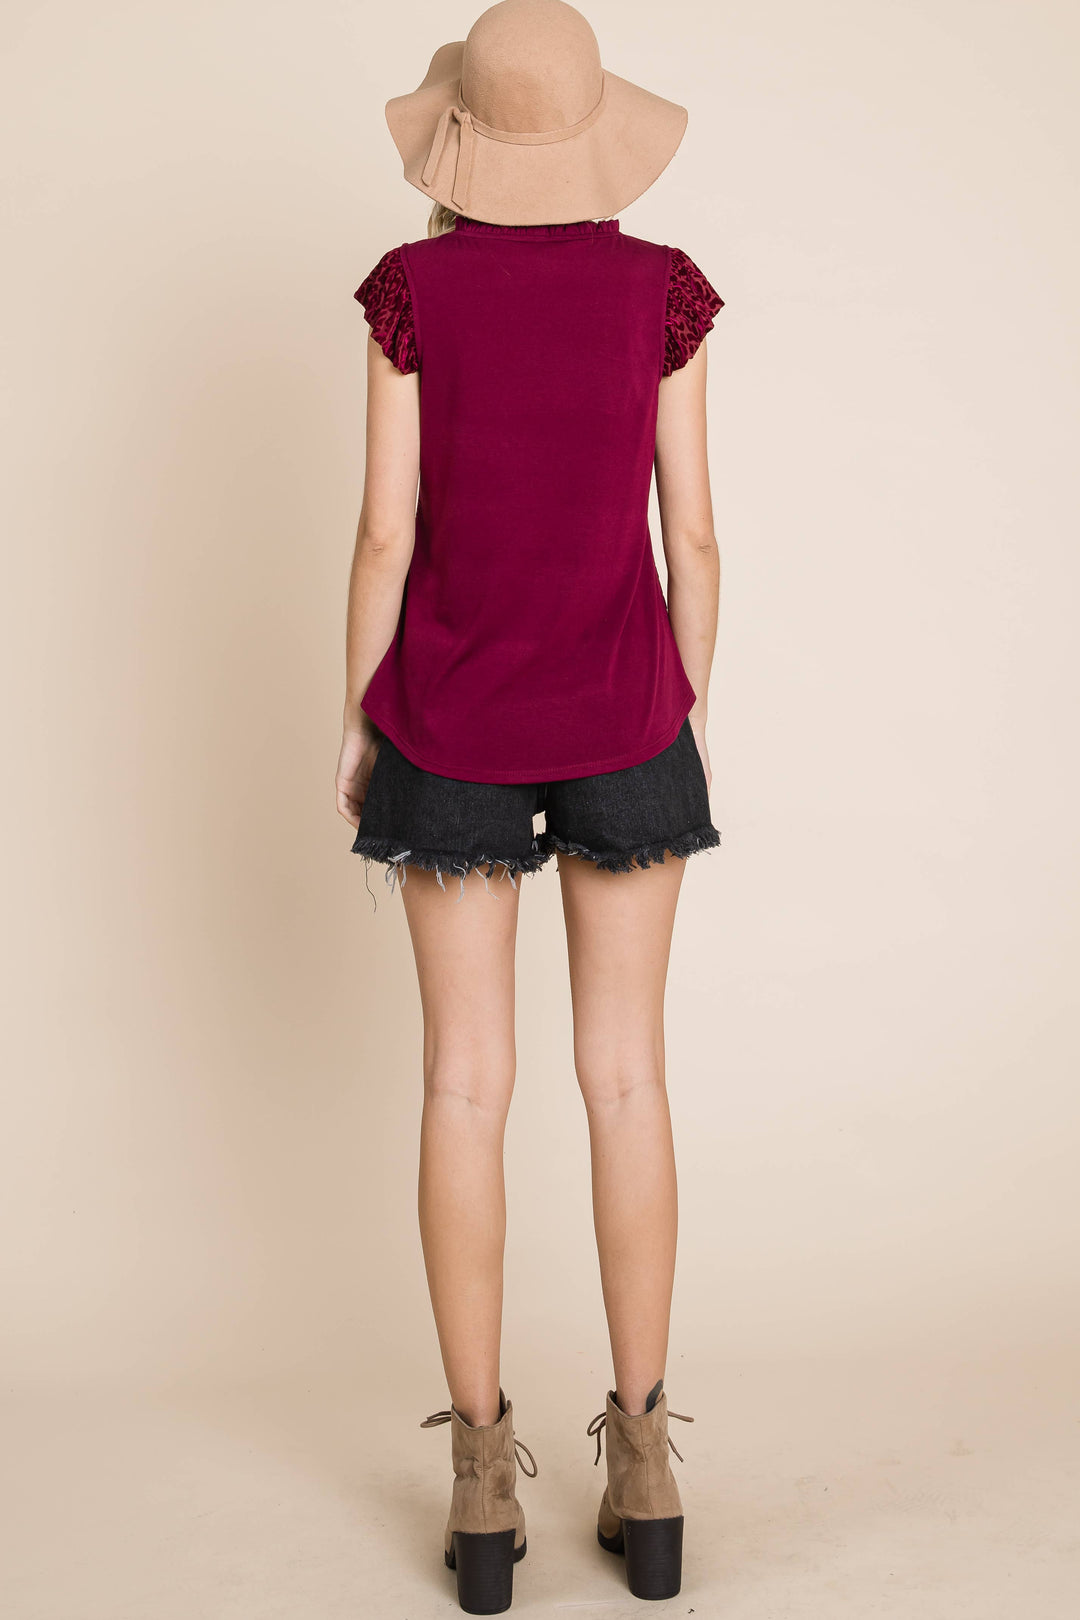 Vanessa Animal Print Velvet Mesh Top, Wine-Short Sleeve Tops-Inspired by Justeen-Women's Clothing Boutique in Chicago, Illinois